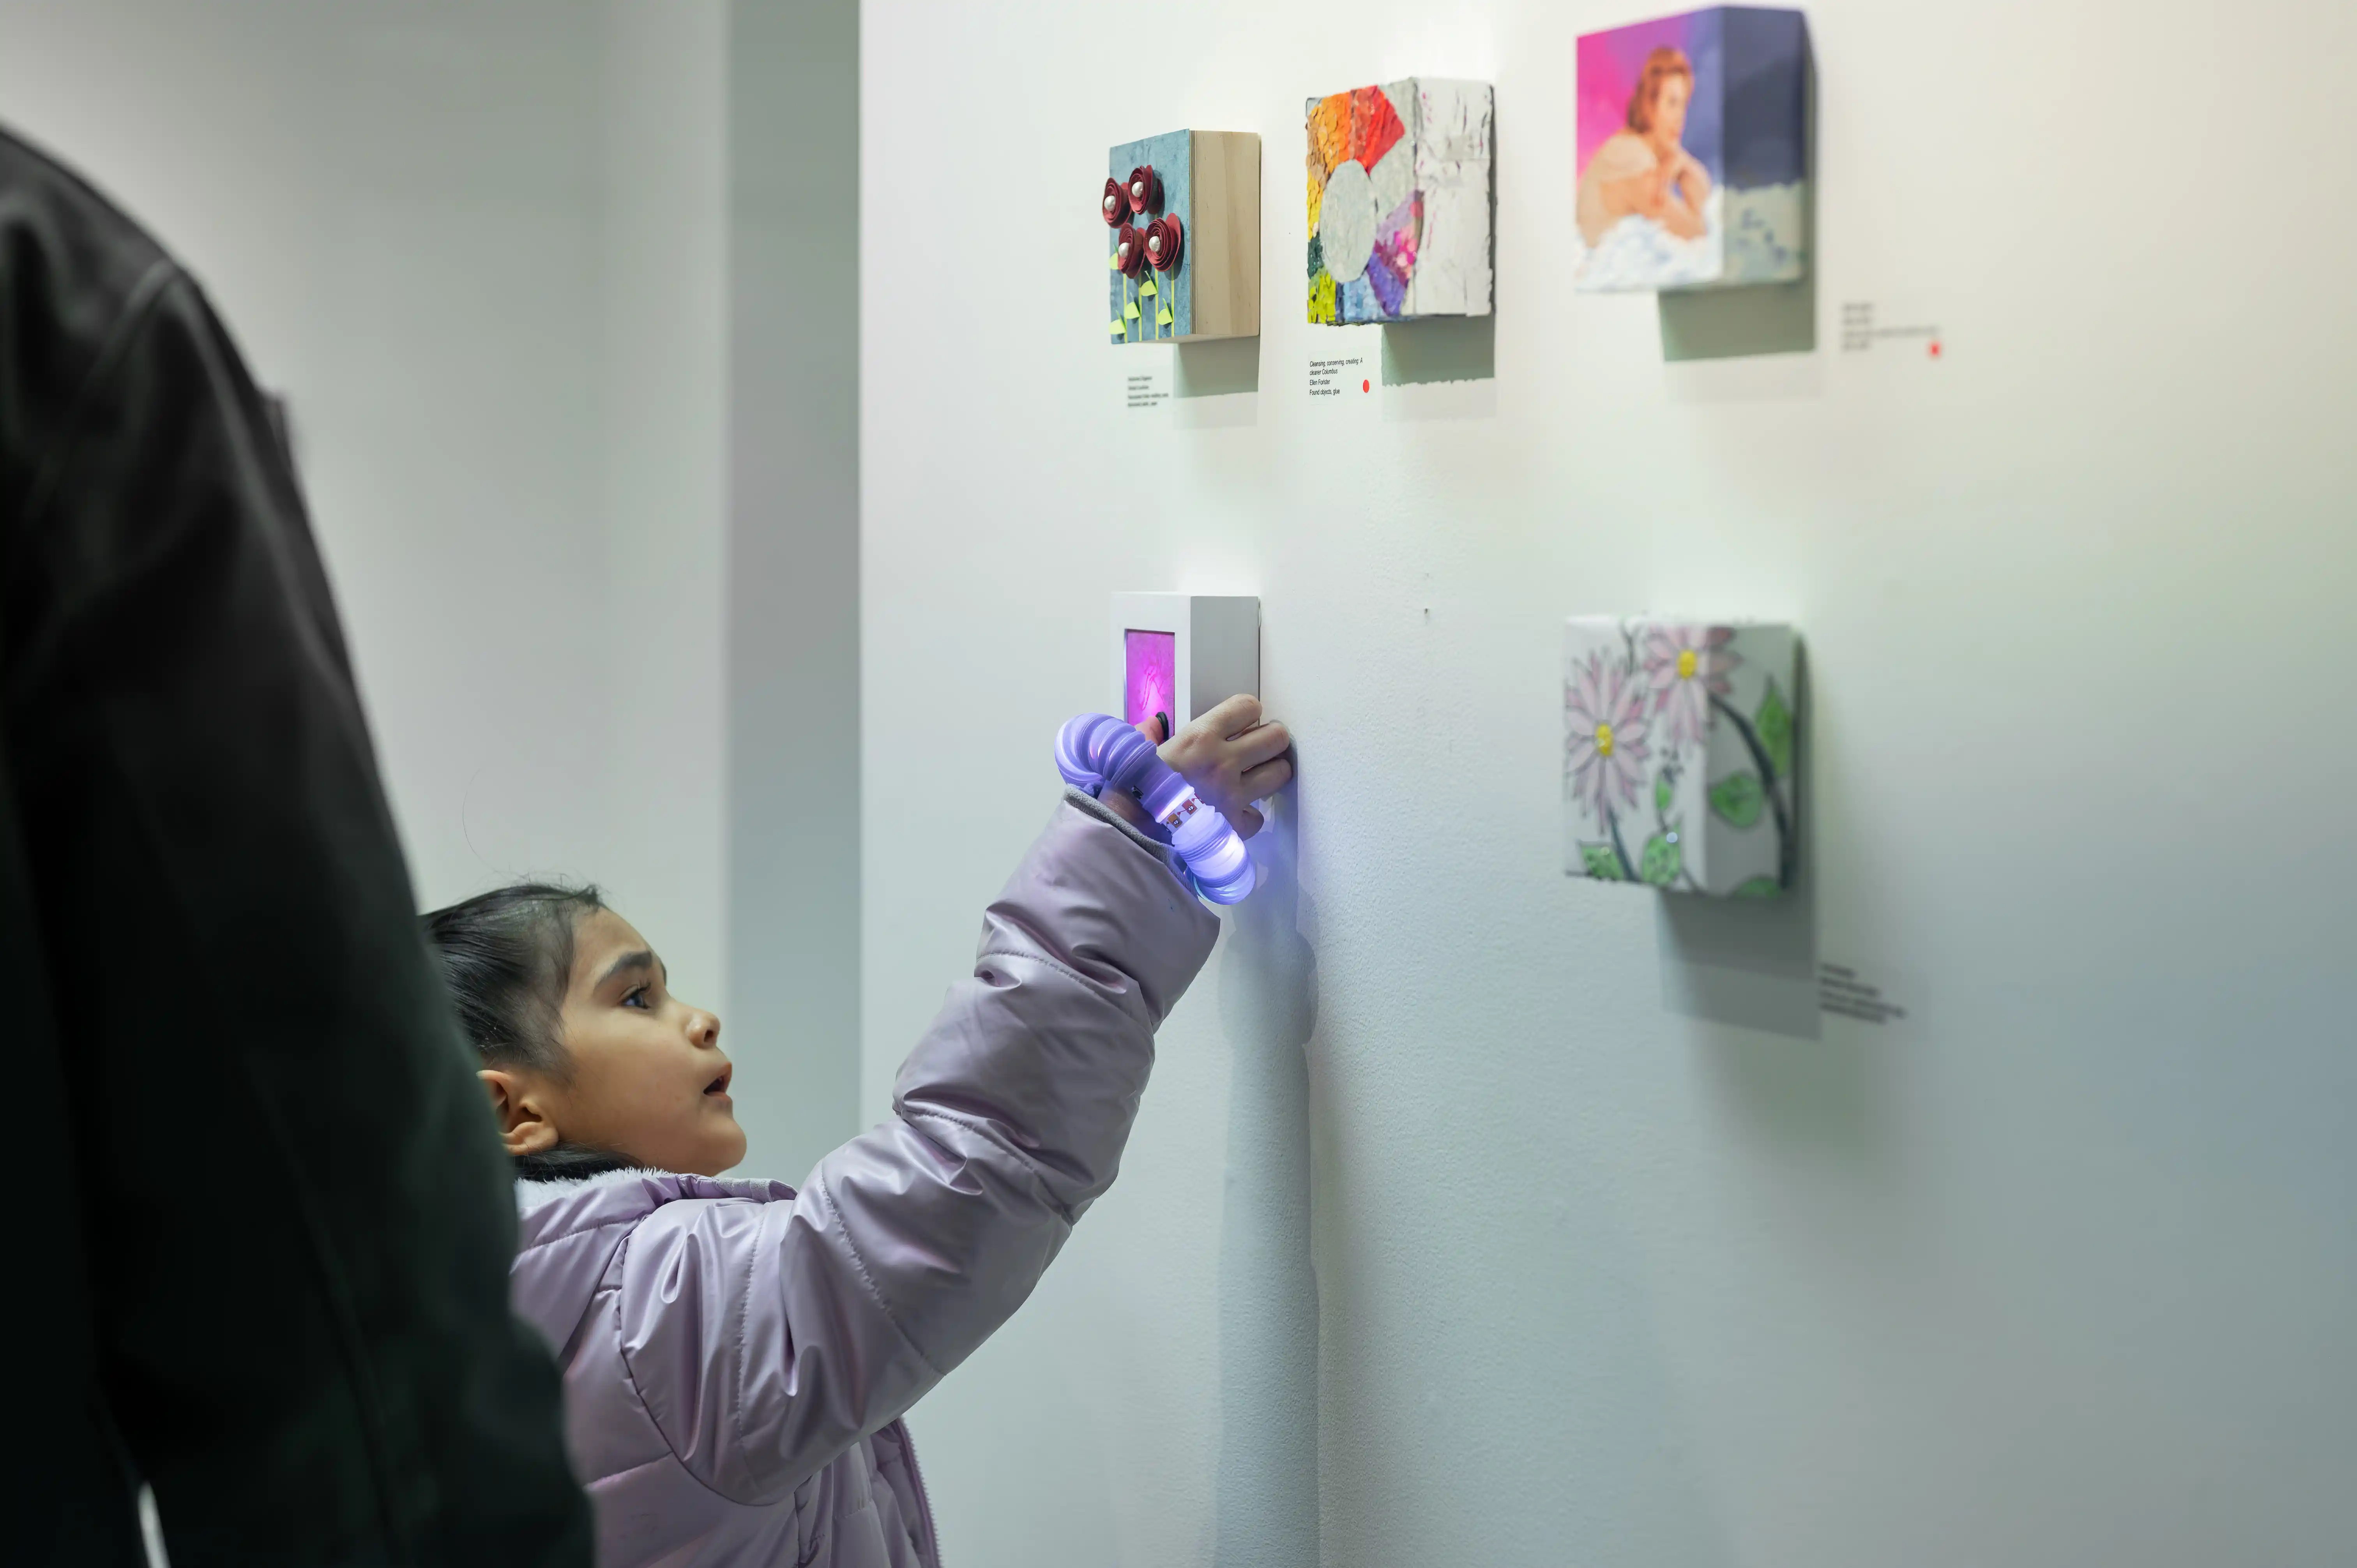 Child in a museum interactively lighting up miniature artworks with a handheld ultraviolet lamp.